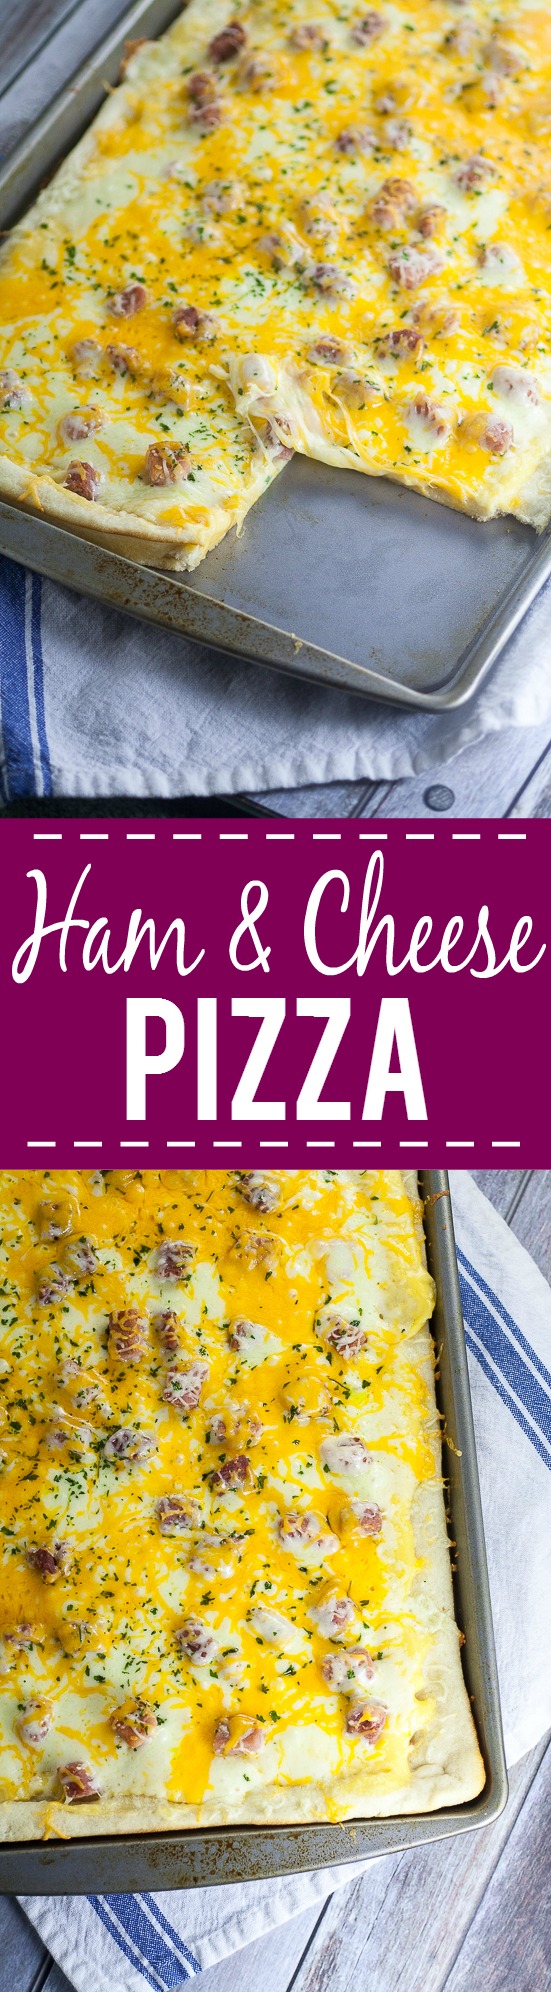 Ham and Cheese Pizza Recipe - Ham and cheese is a classic combination that everyone loves, especially in this creamy, cheesy Ham and Cheese Pizza recipe that makes a yummy and easy family dinner! Make this quick and easy dinner recipe in less than 30 minutes!